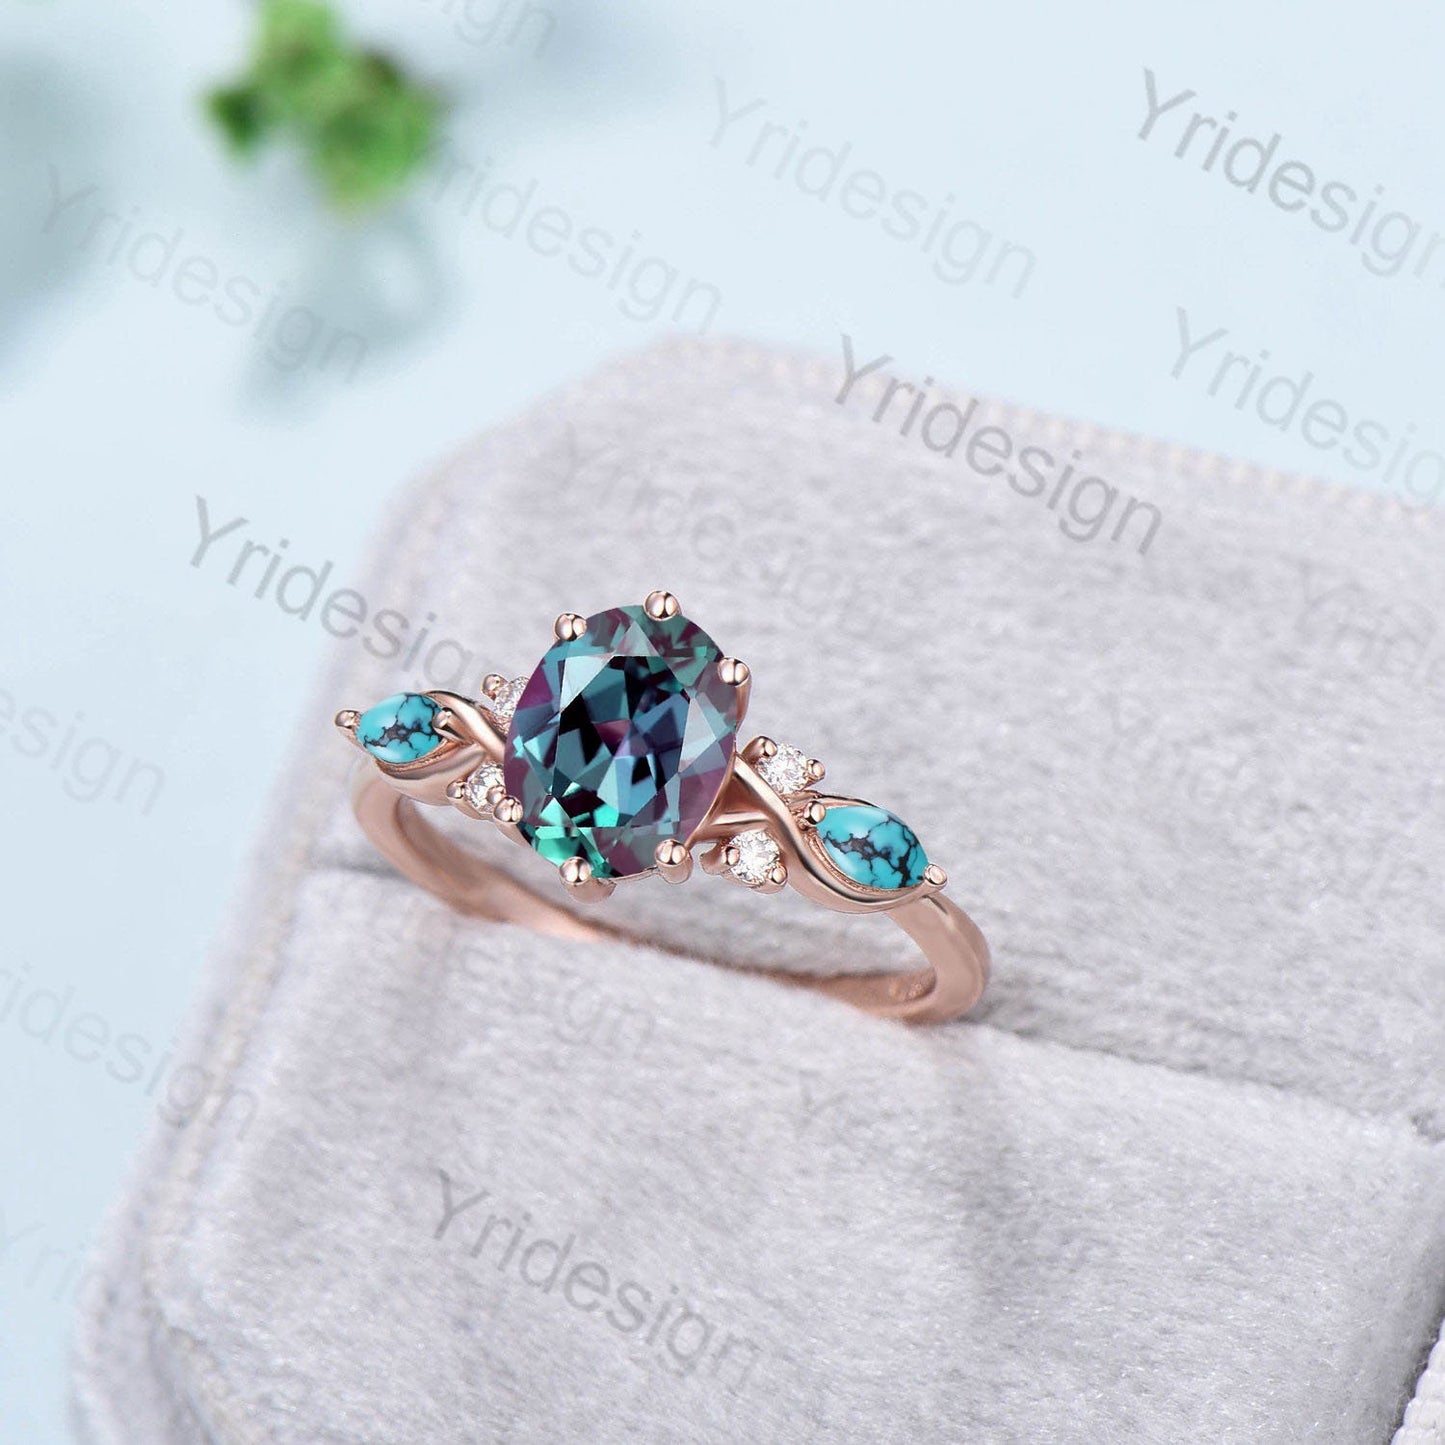 Vintage oval alexandrite engagement ring rose gold twisted unique marquise turquoise wedding ring set art deco color change stone ring gift - PENFINE